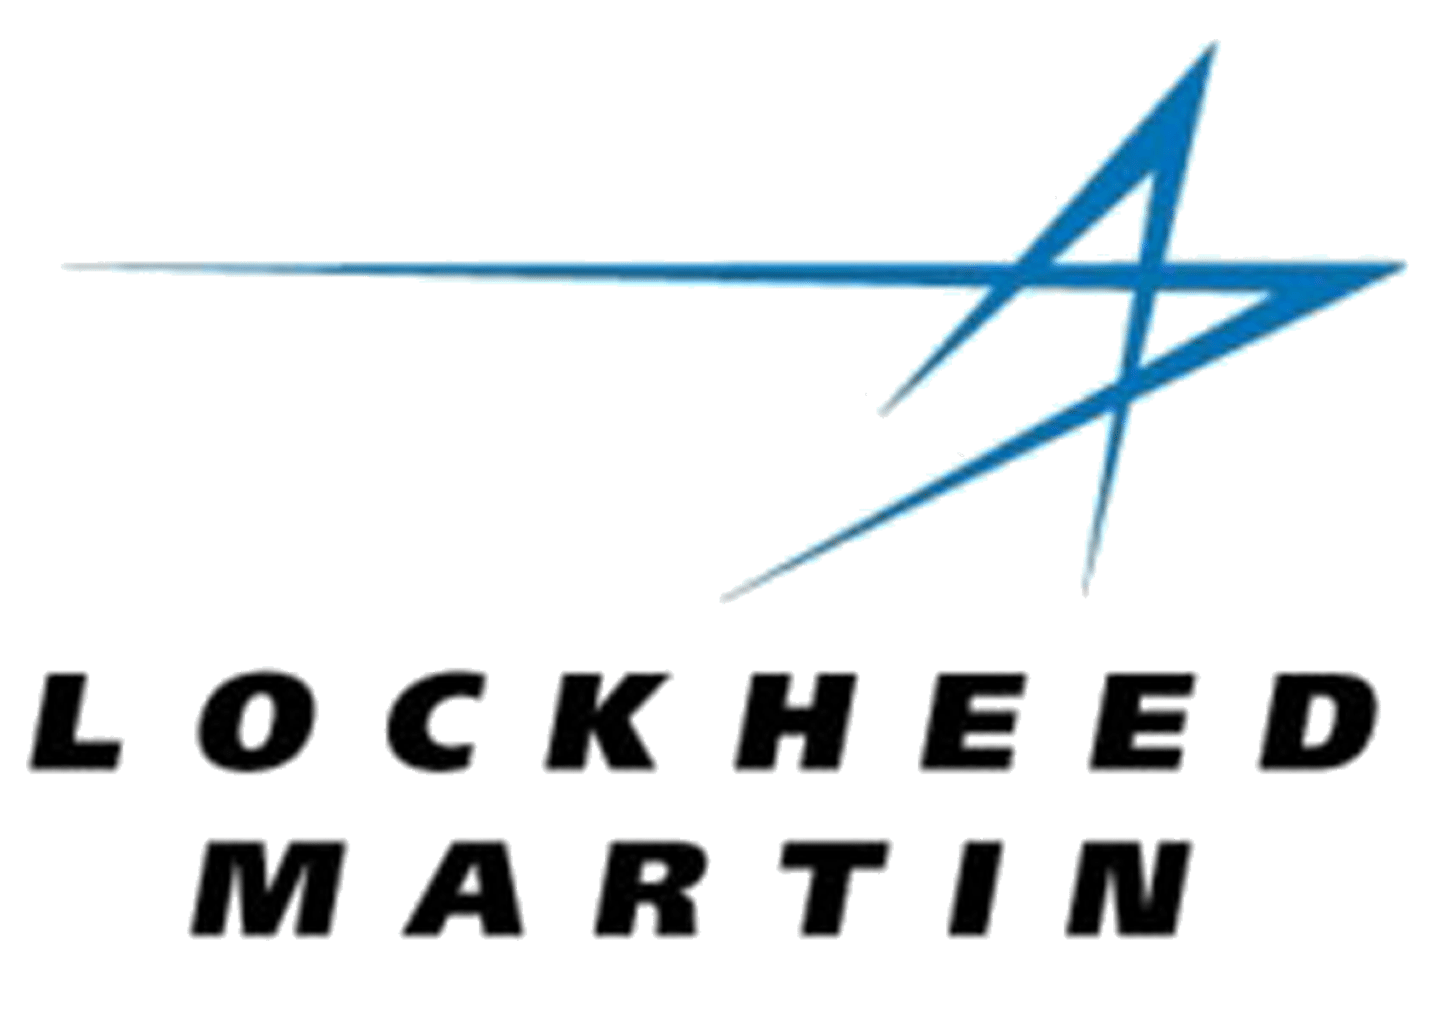 Lockheed Martin Stocks rate high in ESG. Portola Creek - Investment Managers in ESG